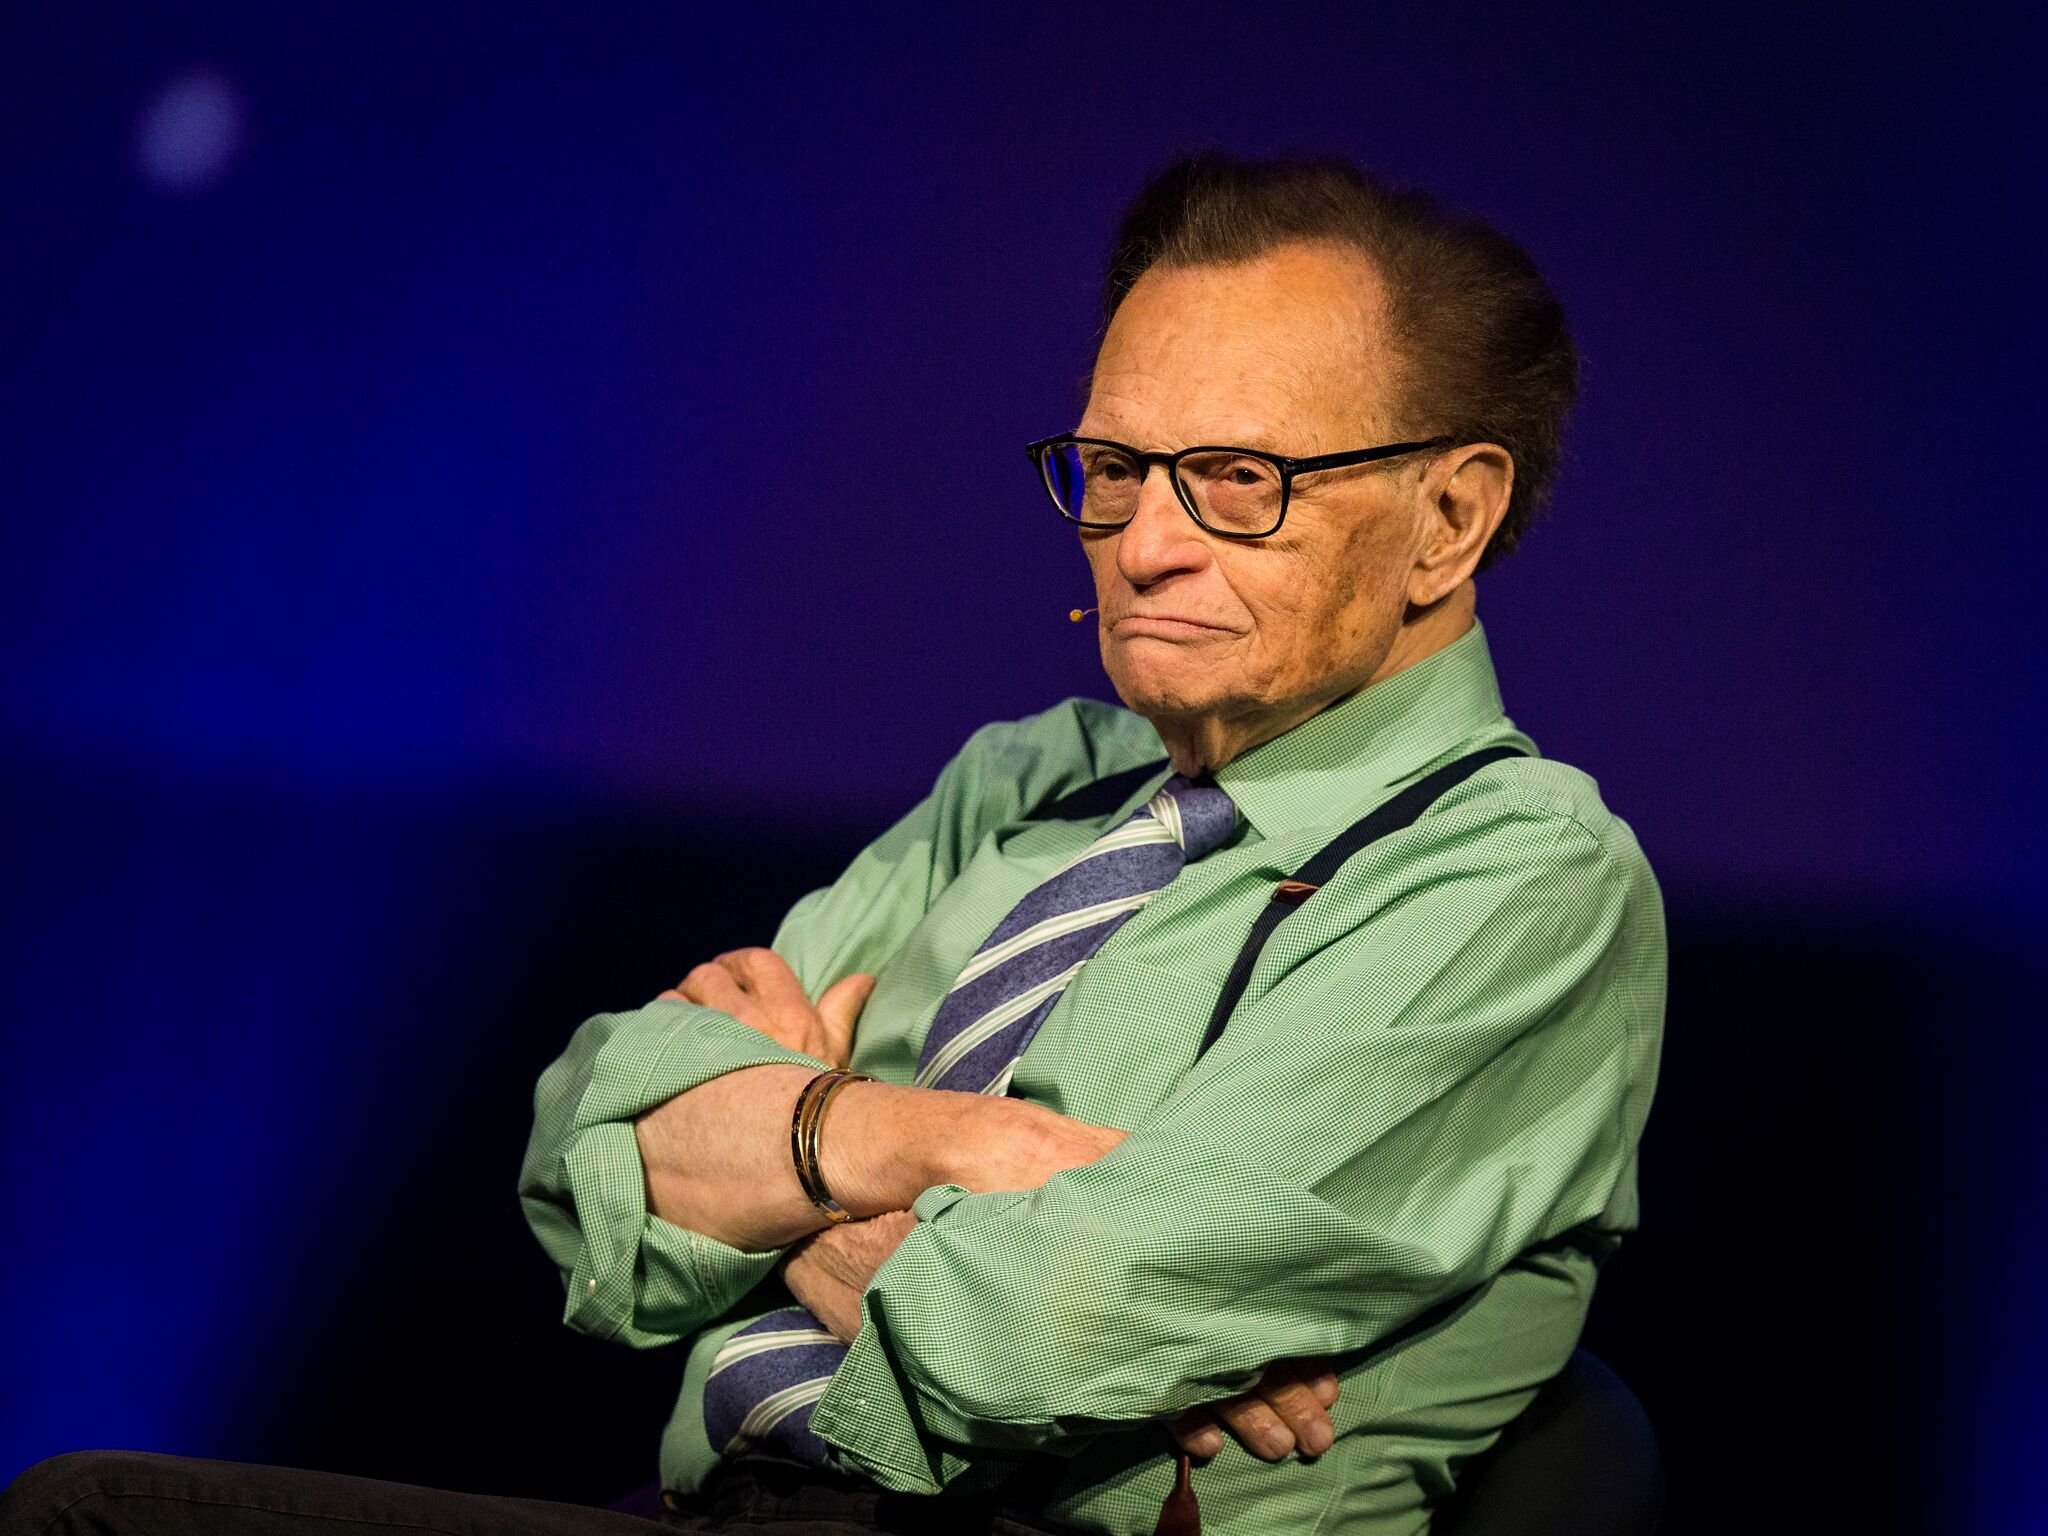 Larry King participates on a discussion on fake news in the media during the Starmus Festival  | Getty Images